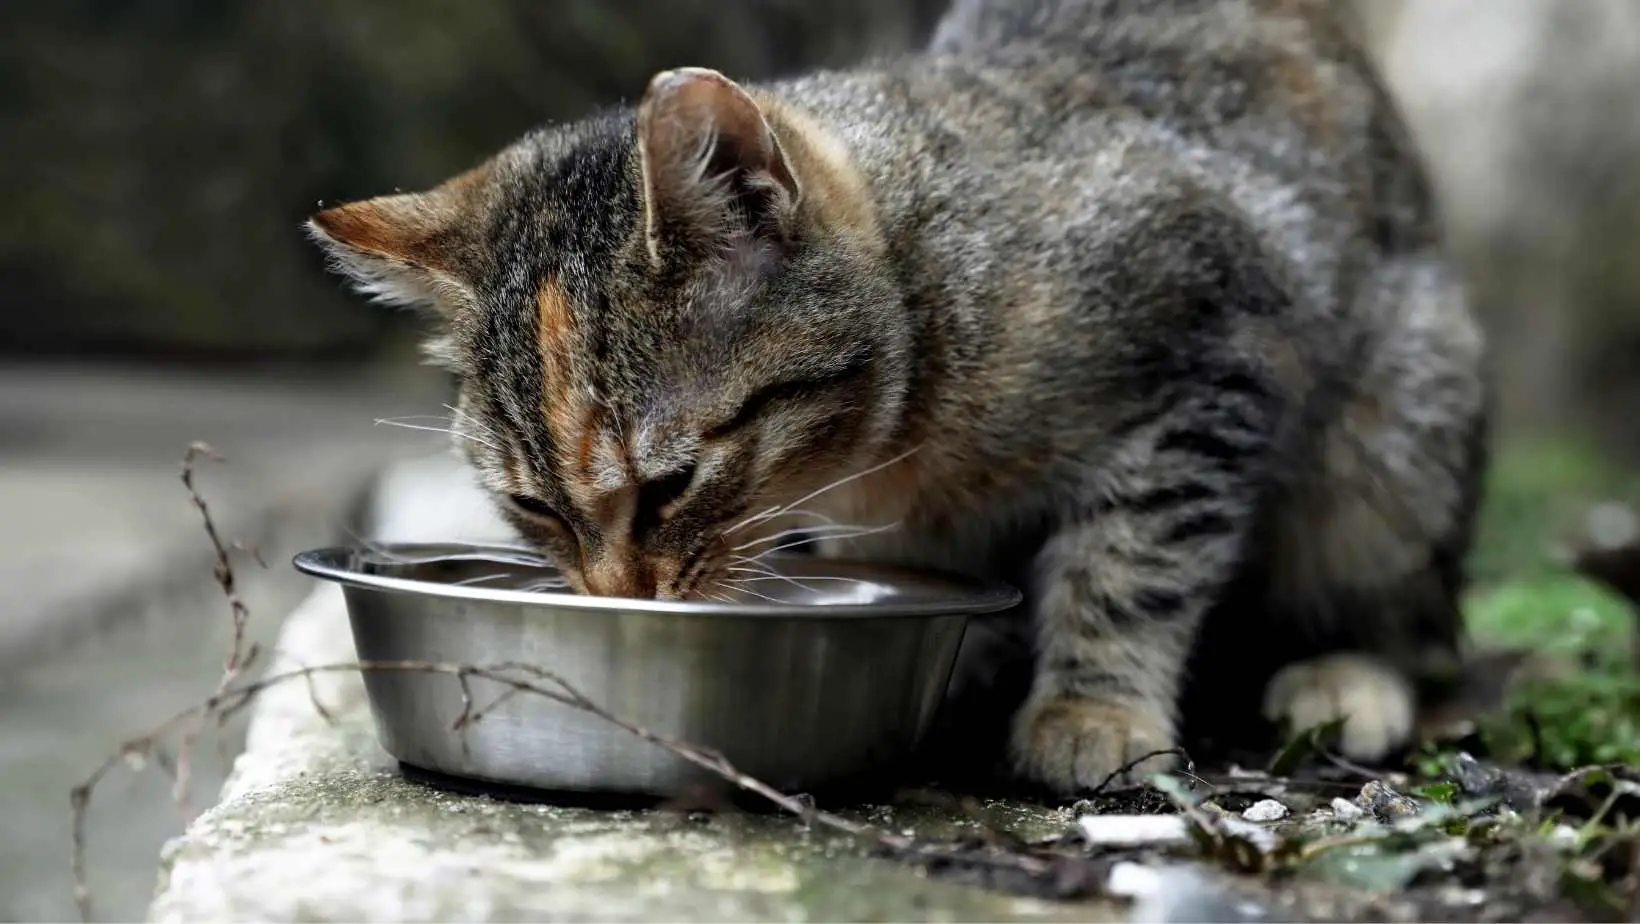 What to feed a stray cat?